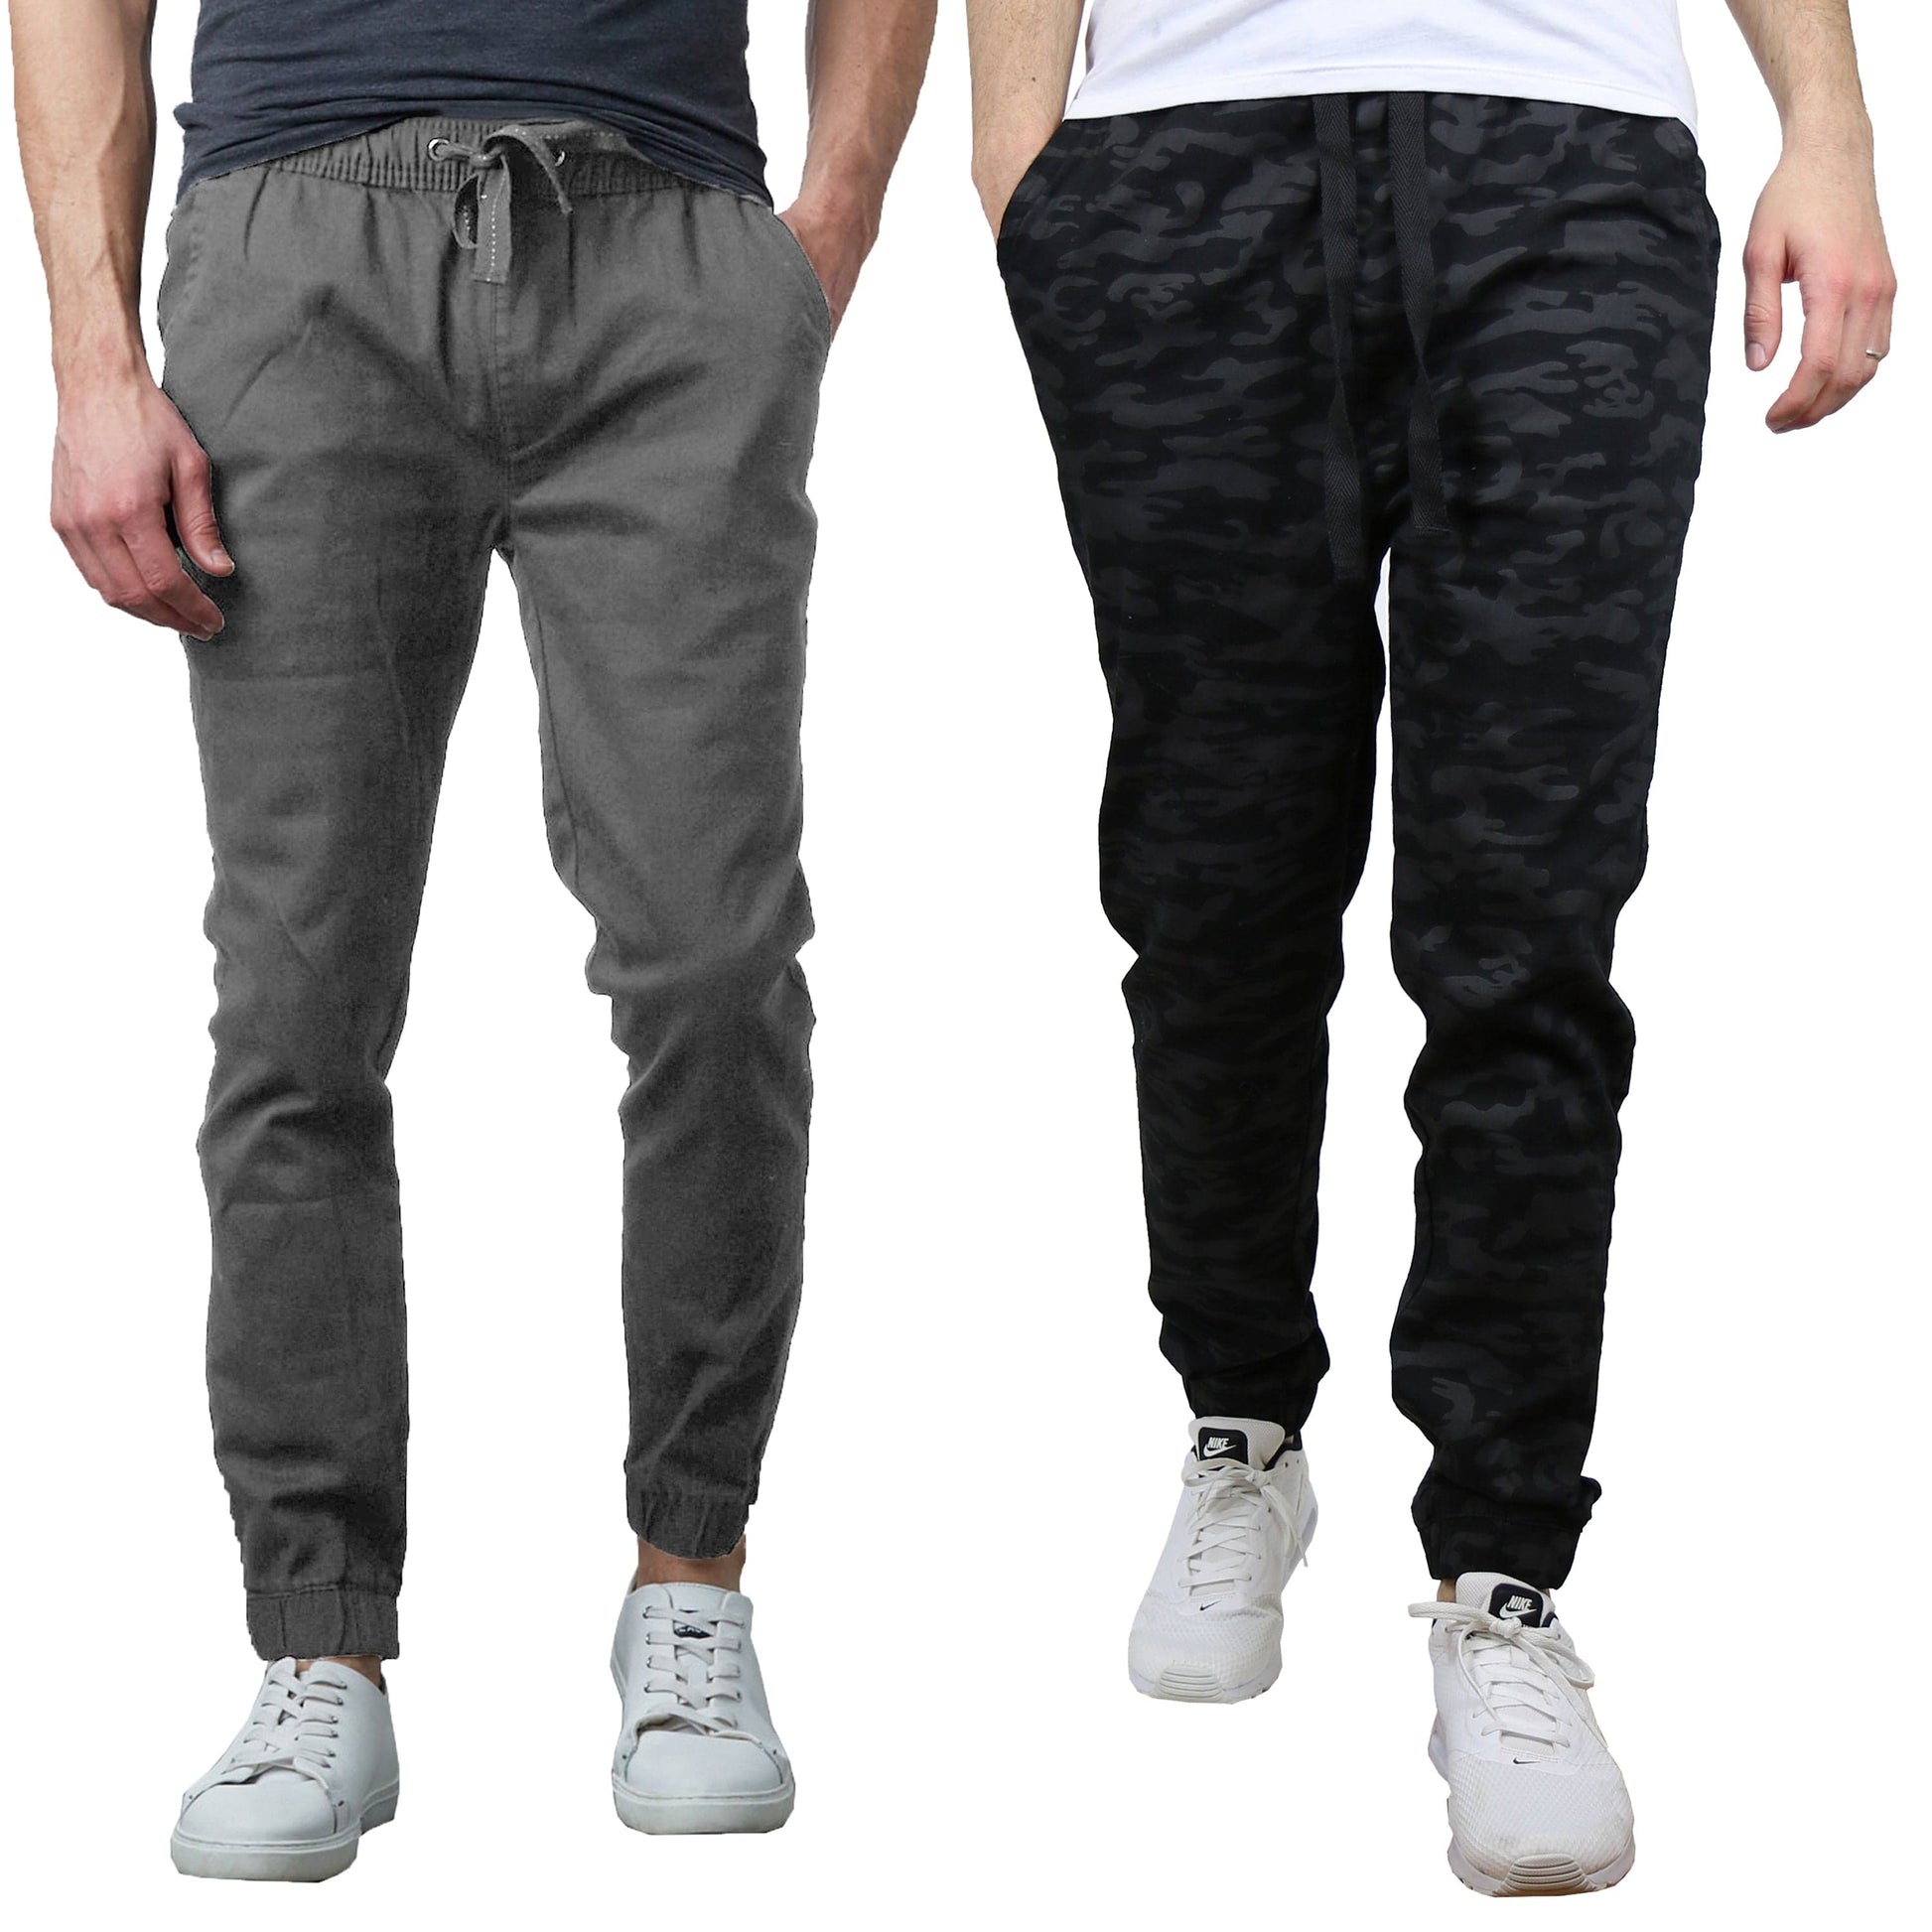  Galaxy by Harvic Men's Basic Stretch Twill Joggers